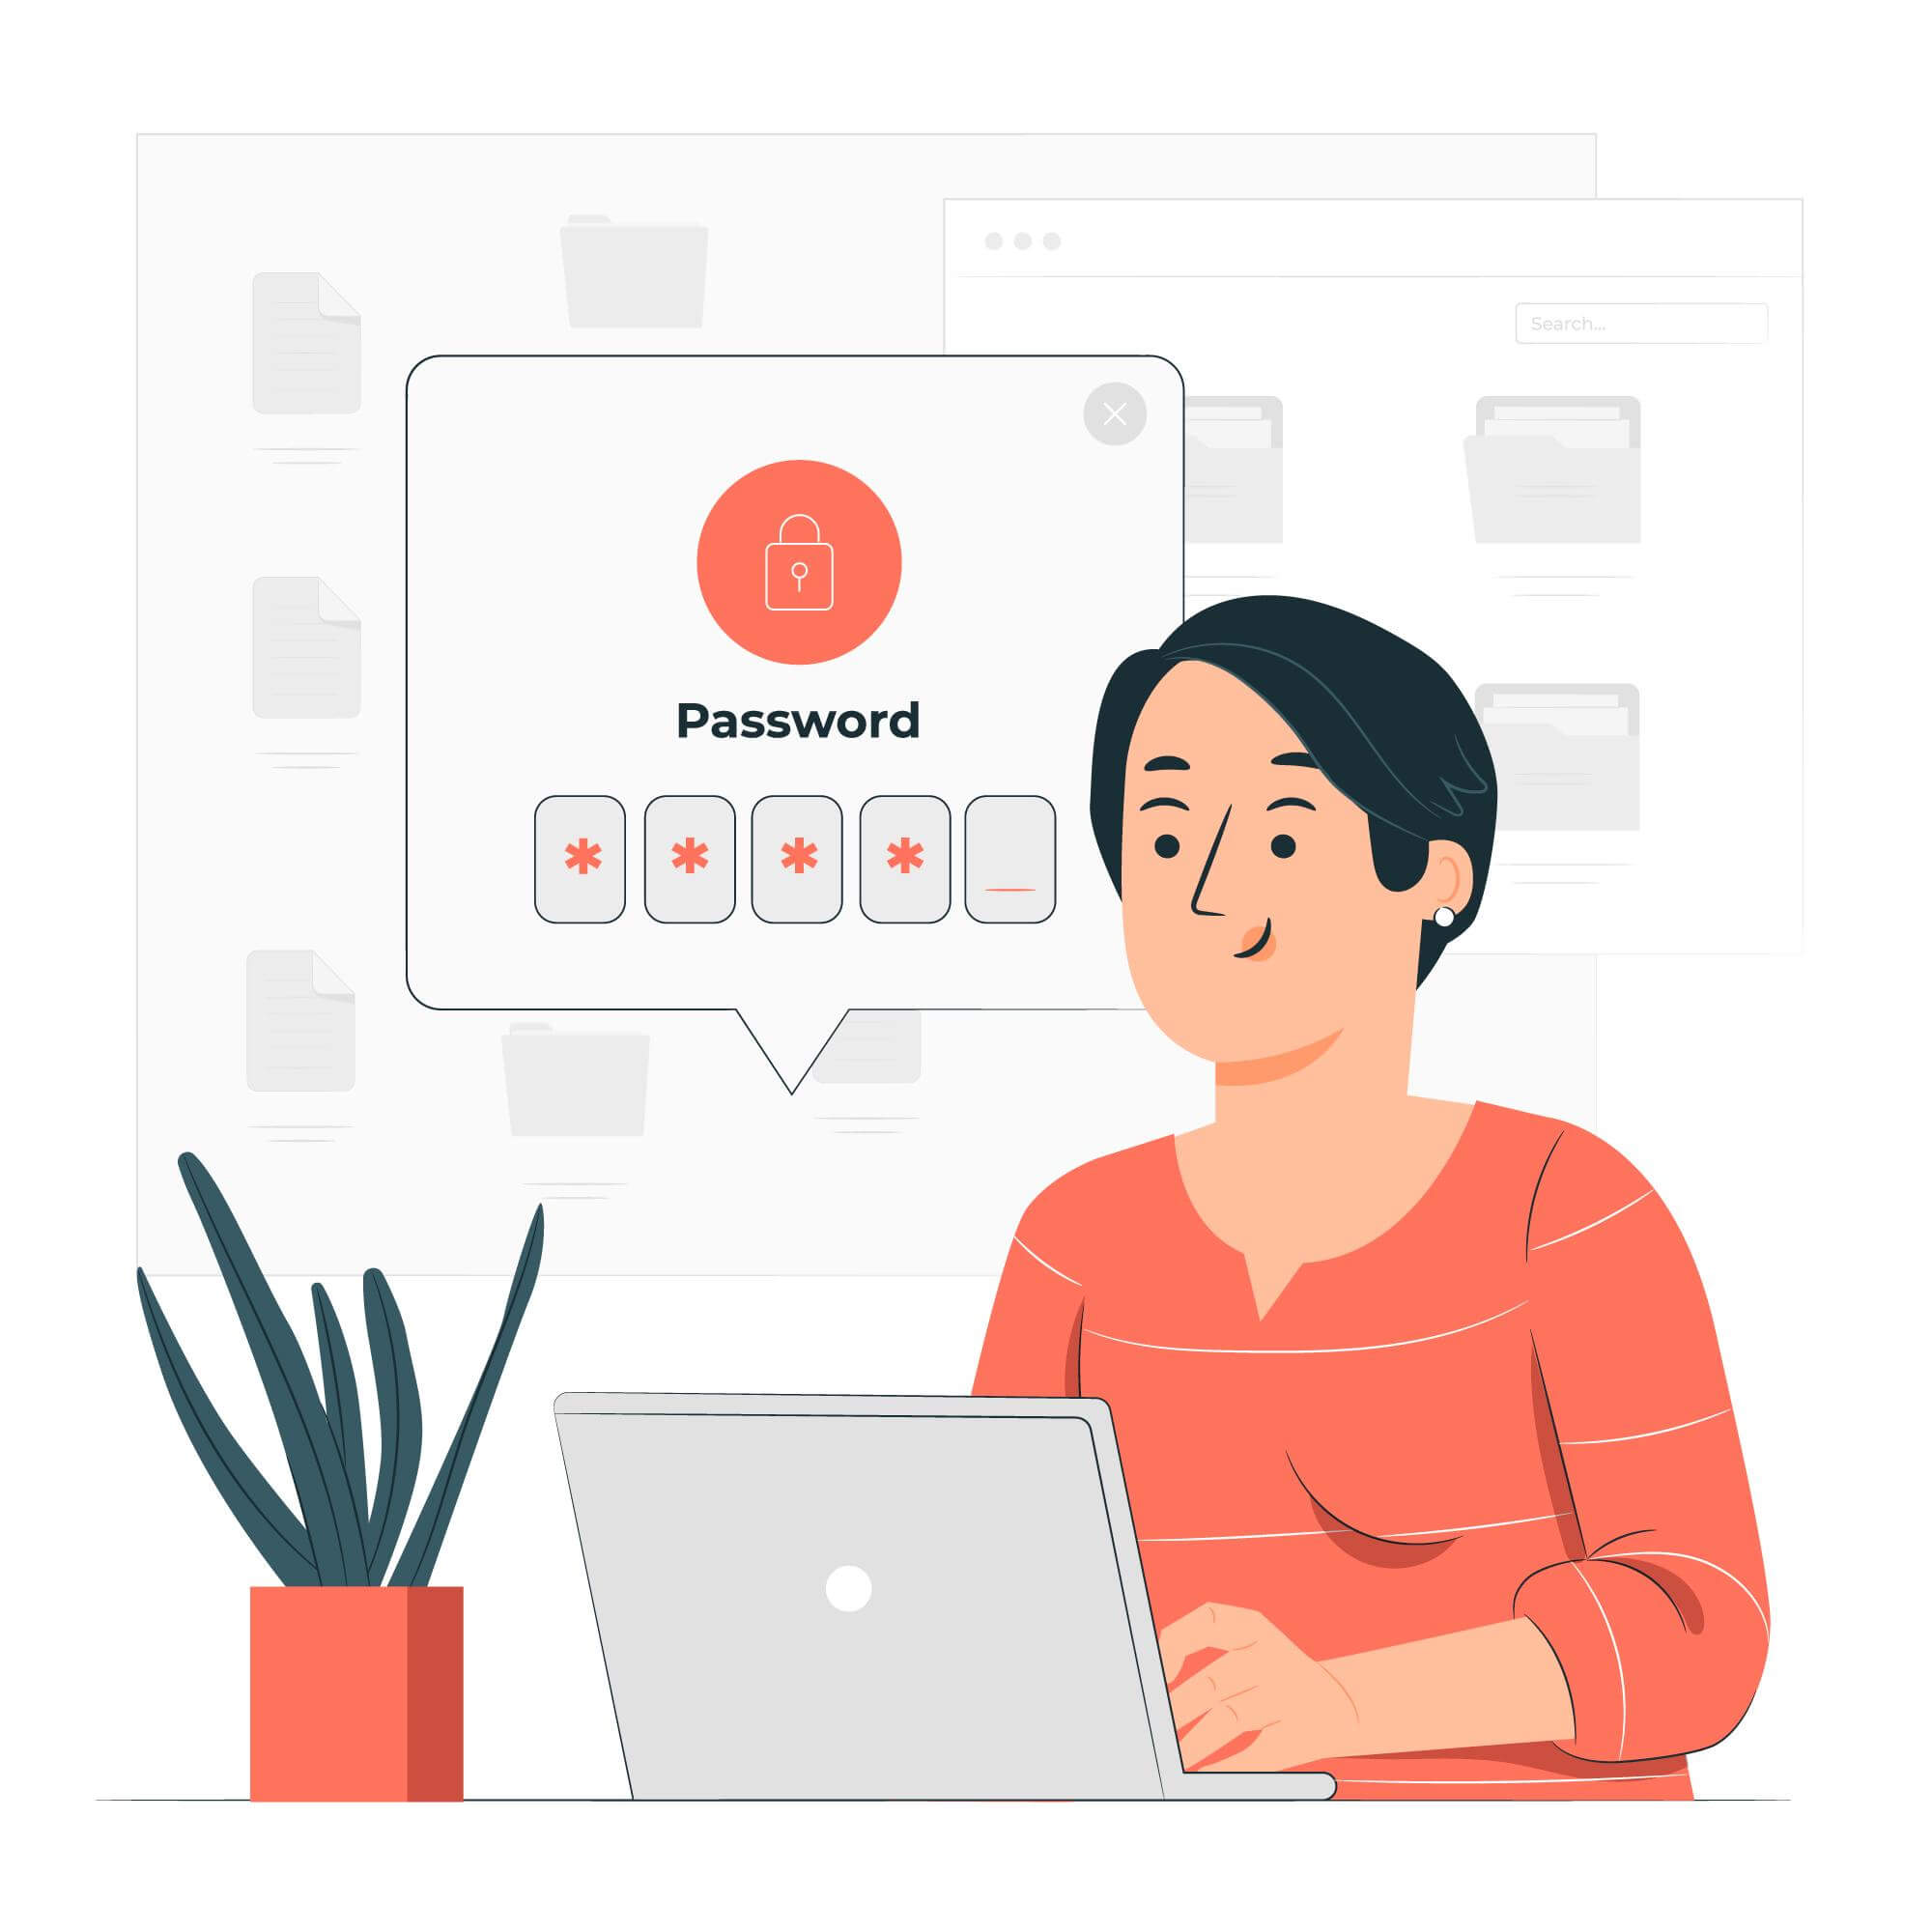 Forgot Password Page Image